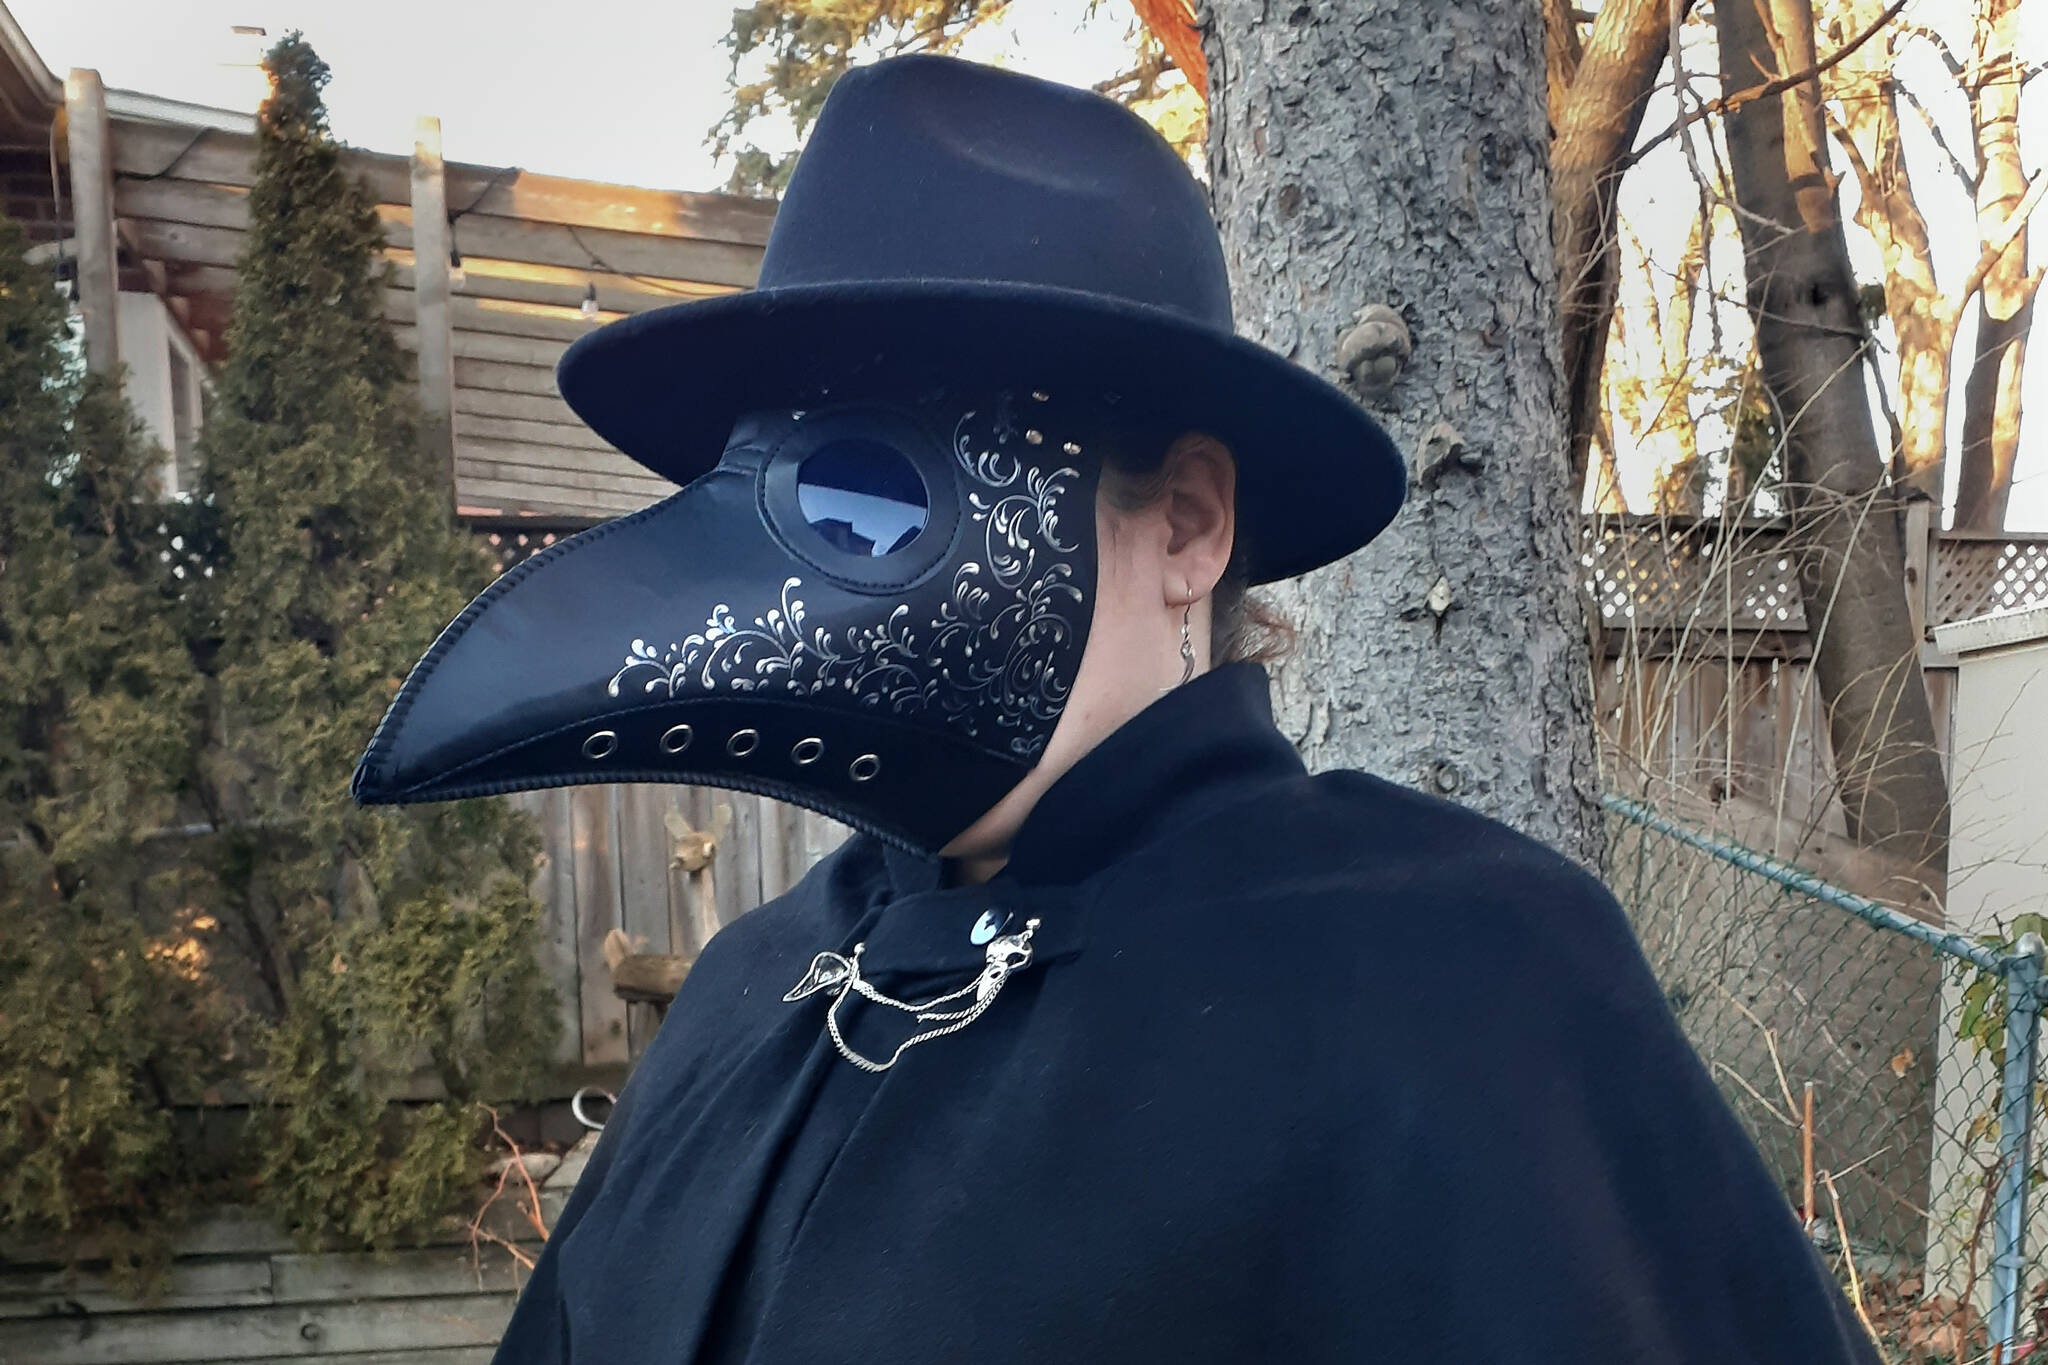 toronto-woman-explains-why-she-wears-a-plague-doctor-mask-and-outfit